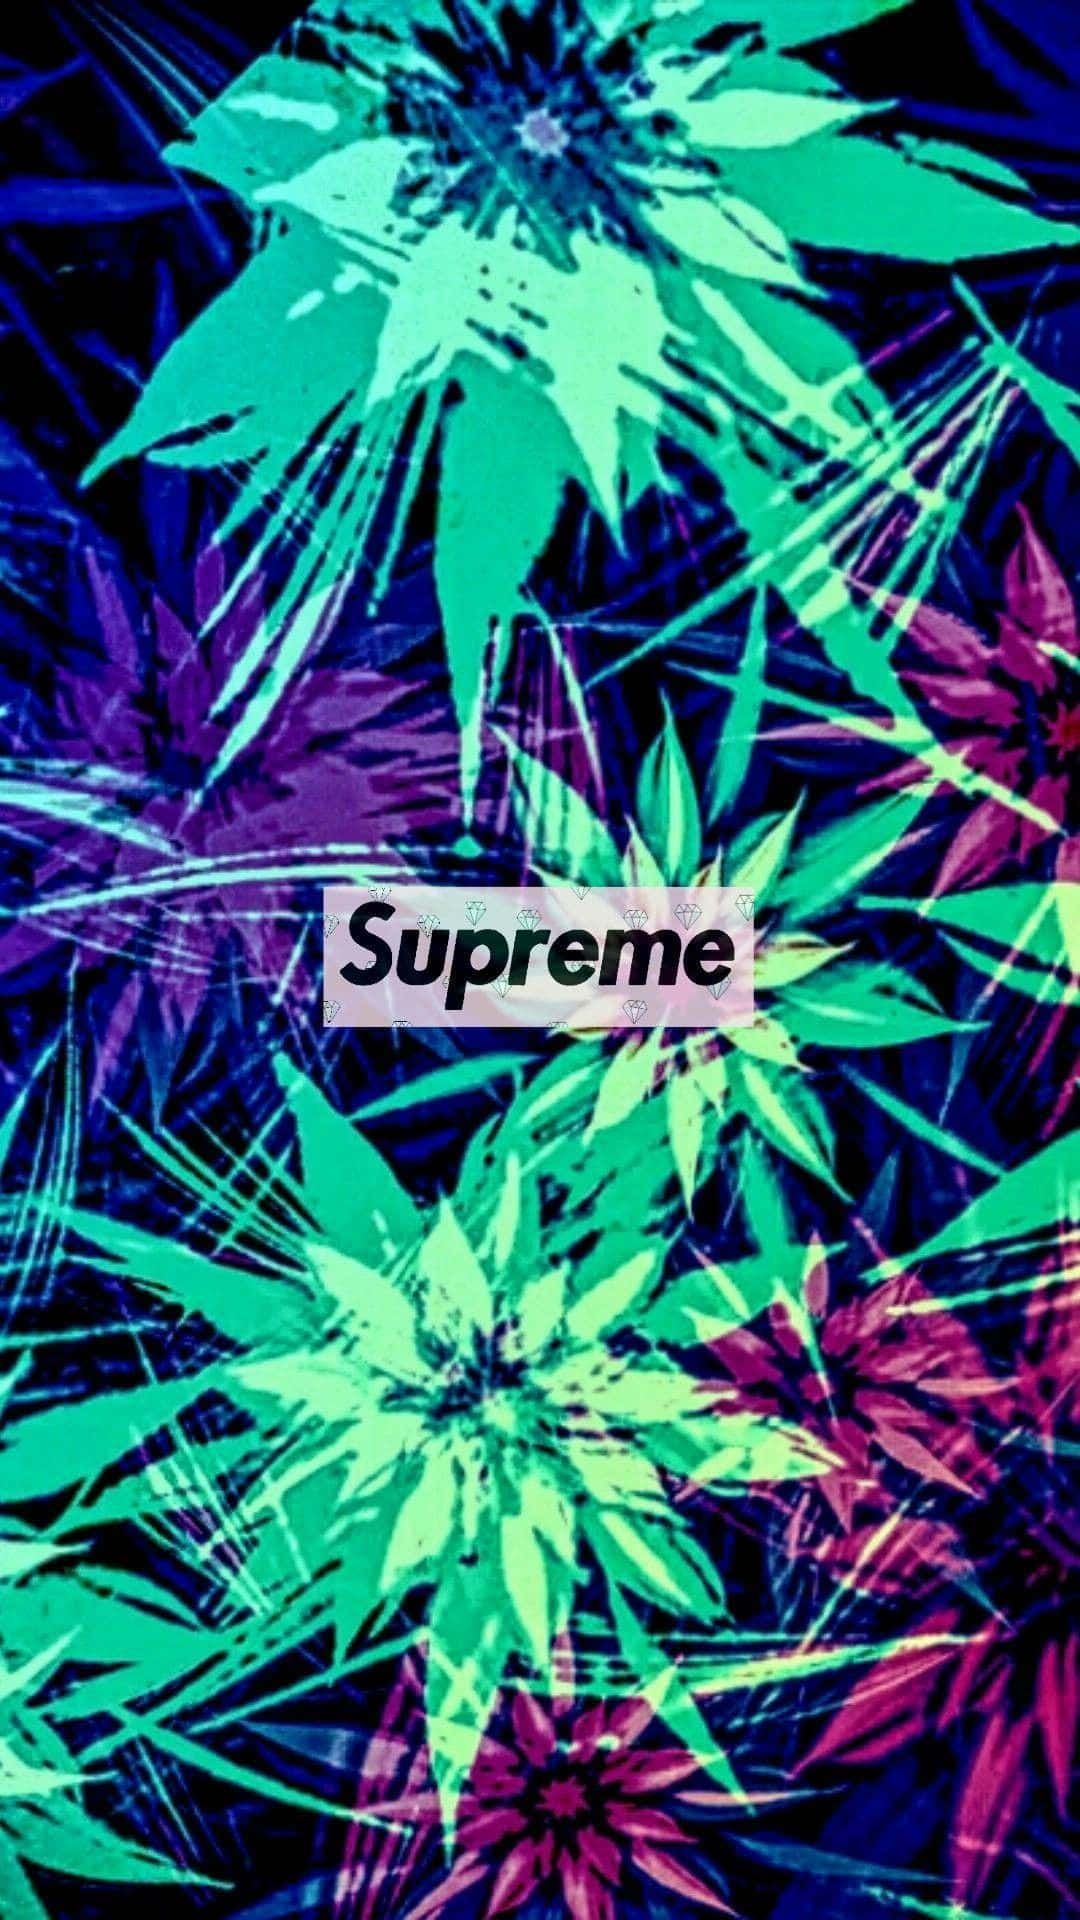 Supreme Wallpapers - Hd Wallpapers Background